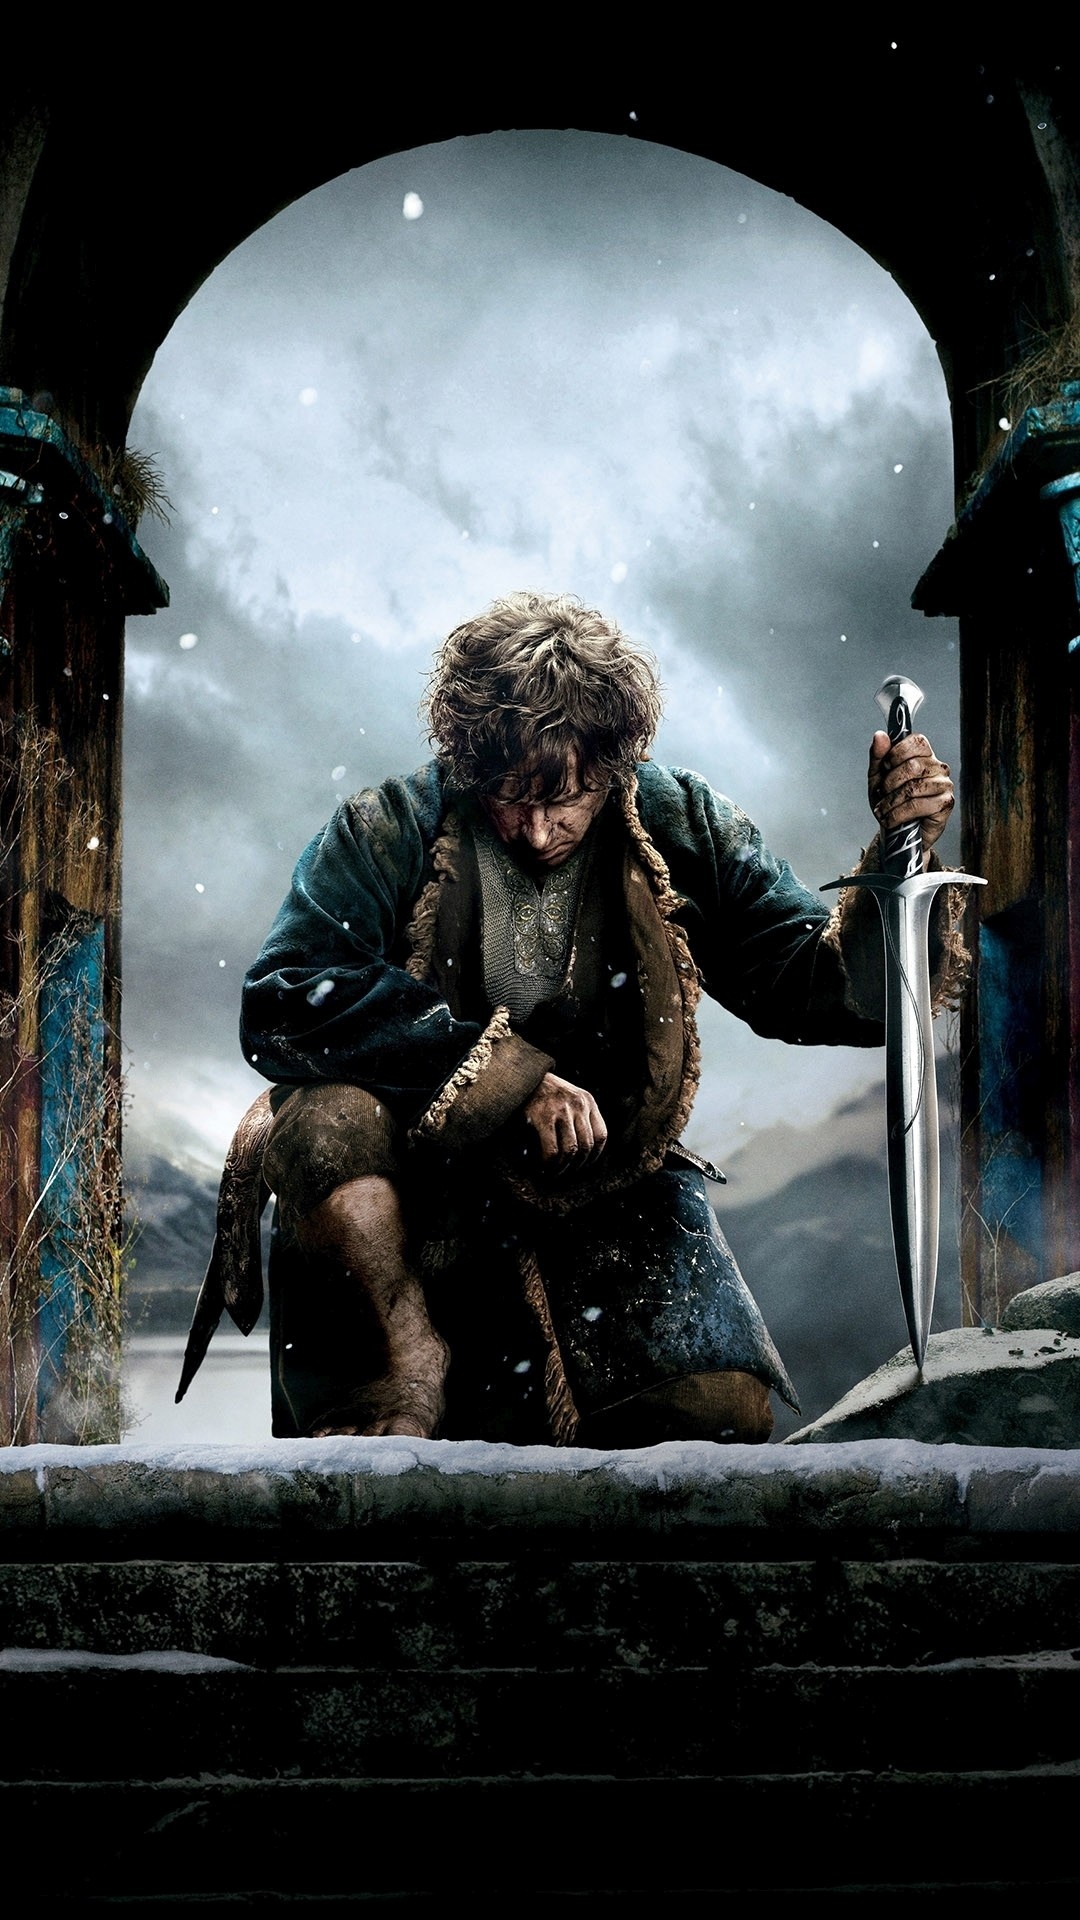 Bilbo Baggins character, Hobbit wallpaper, Mythical world, Android device, 1080x1920 Full HD Handy